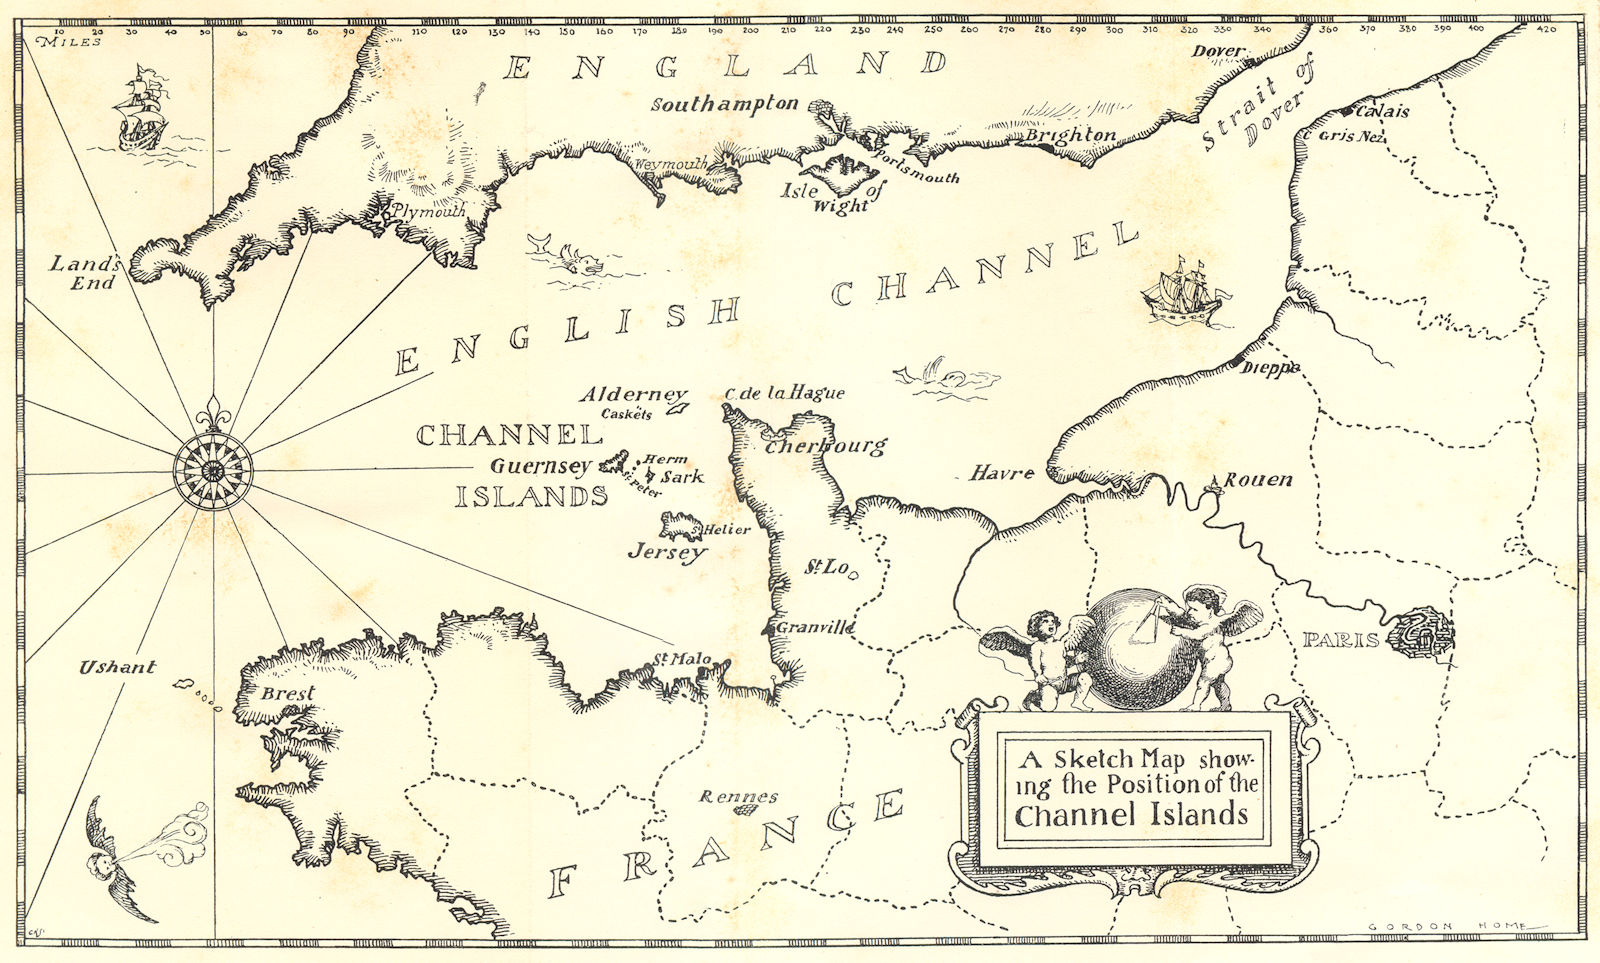 CHANNEL ISLANDS. A Sketch map showing the position of the Channel Islands 1904